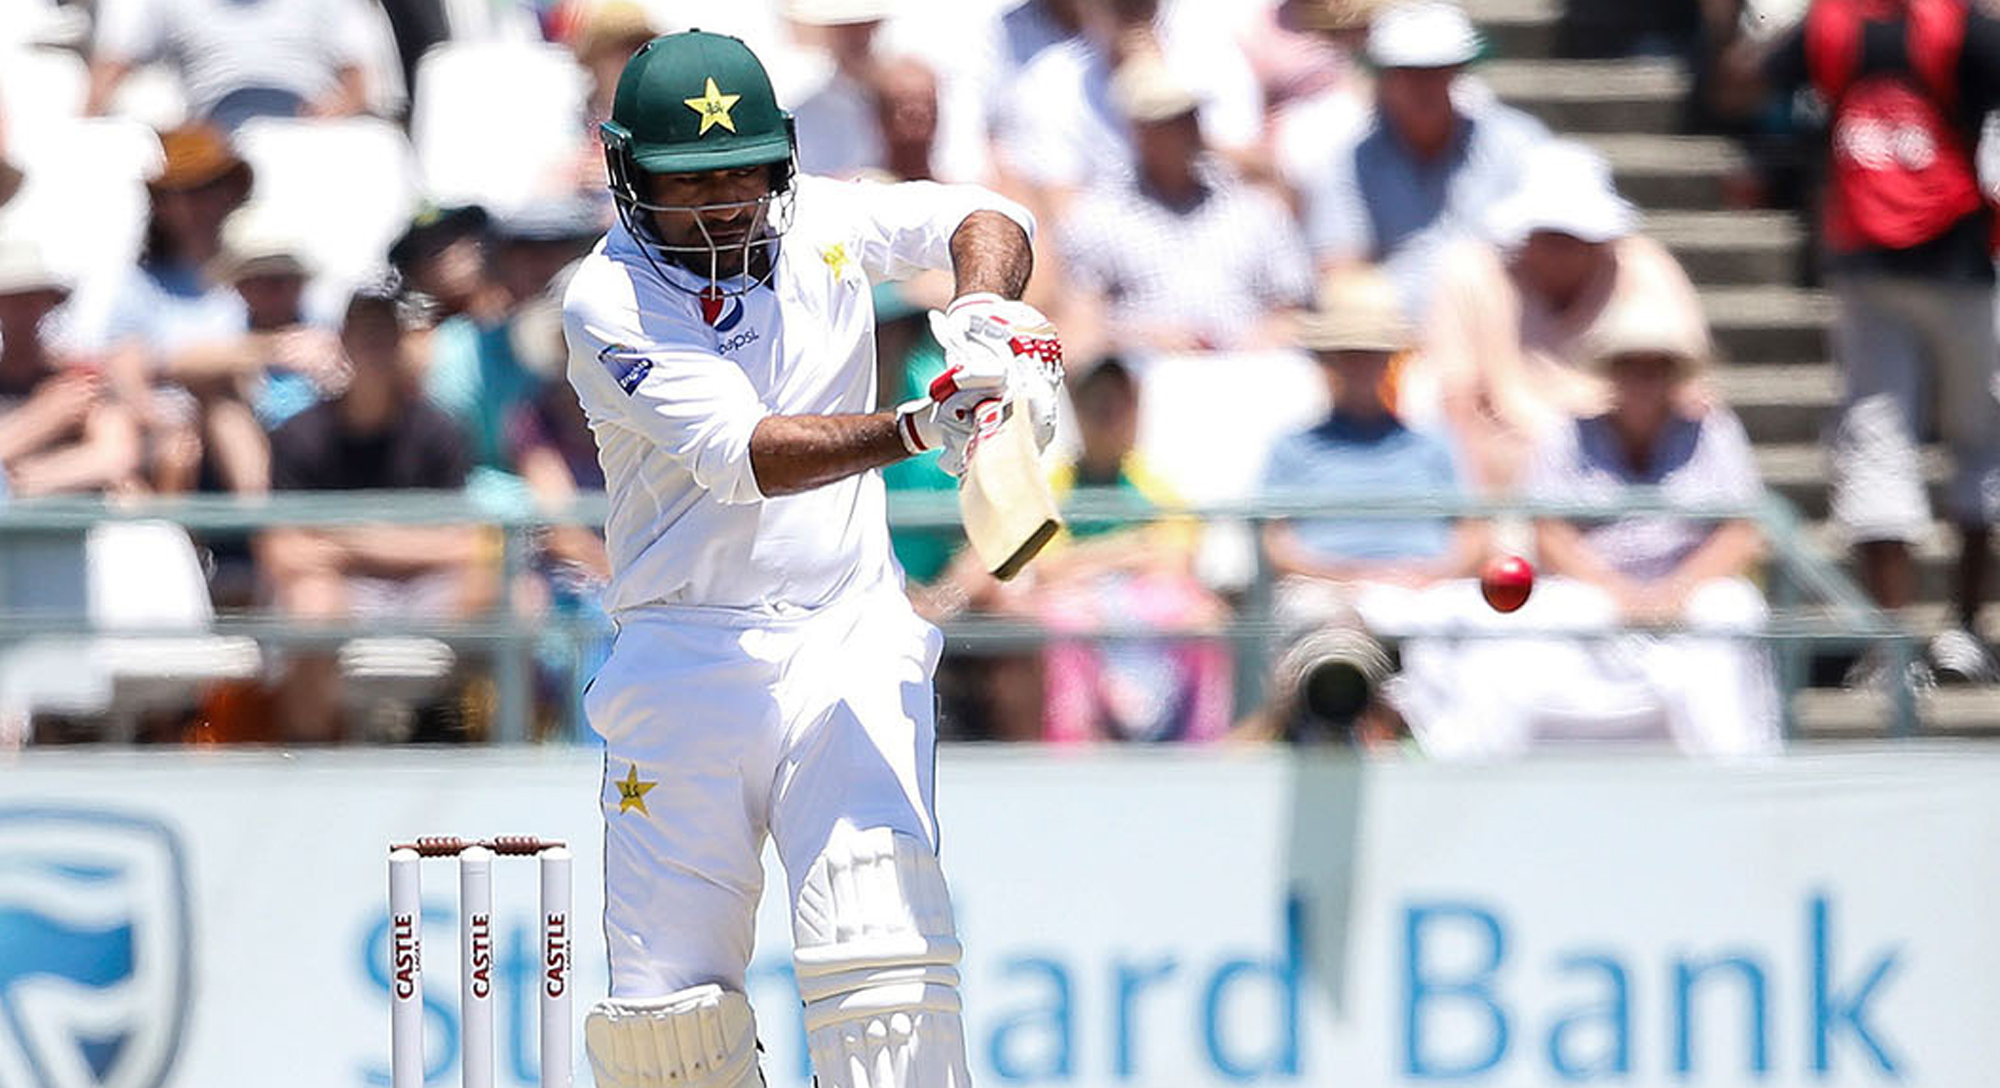 Pakistan vs South Africa - Second Test in Cape Town